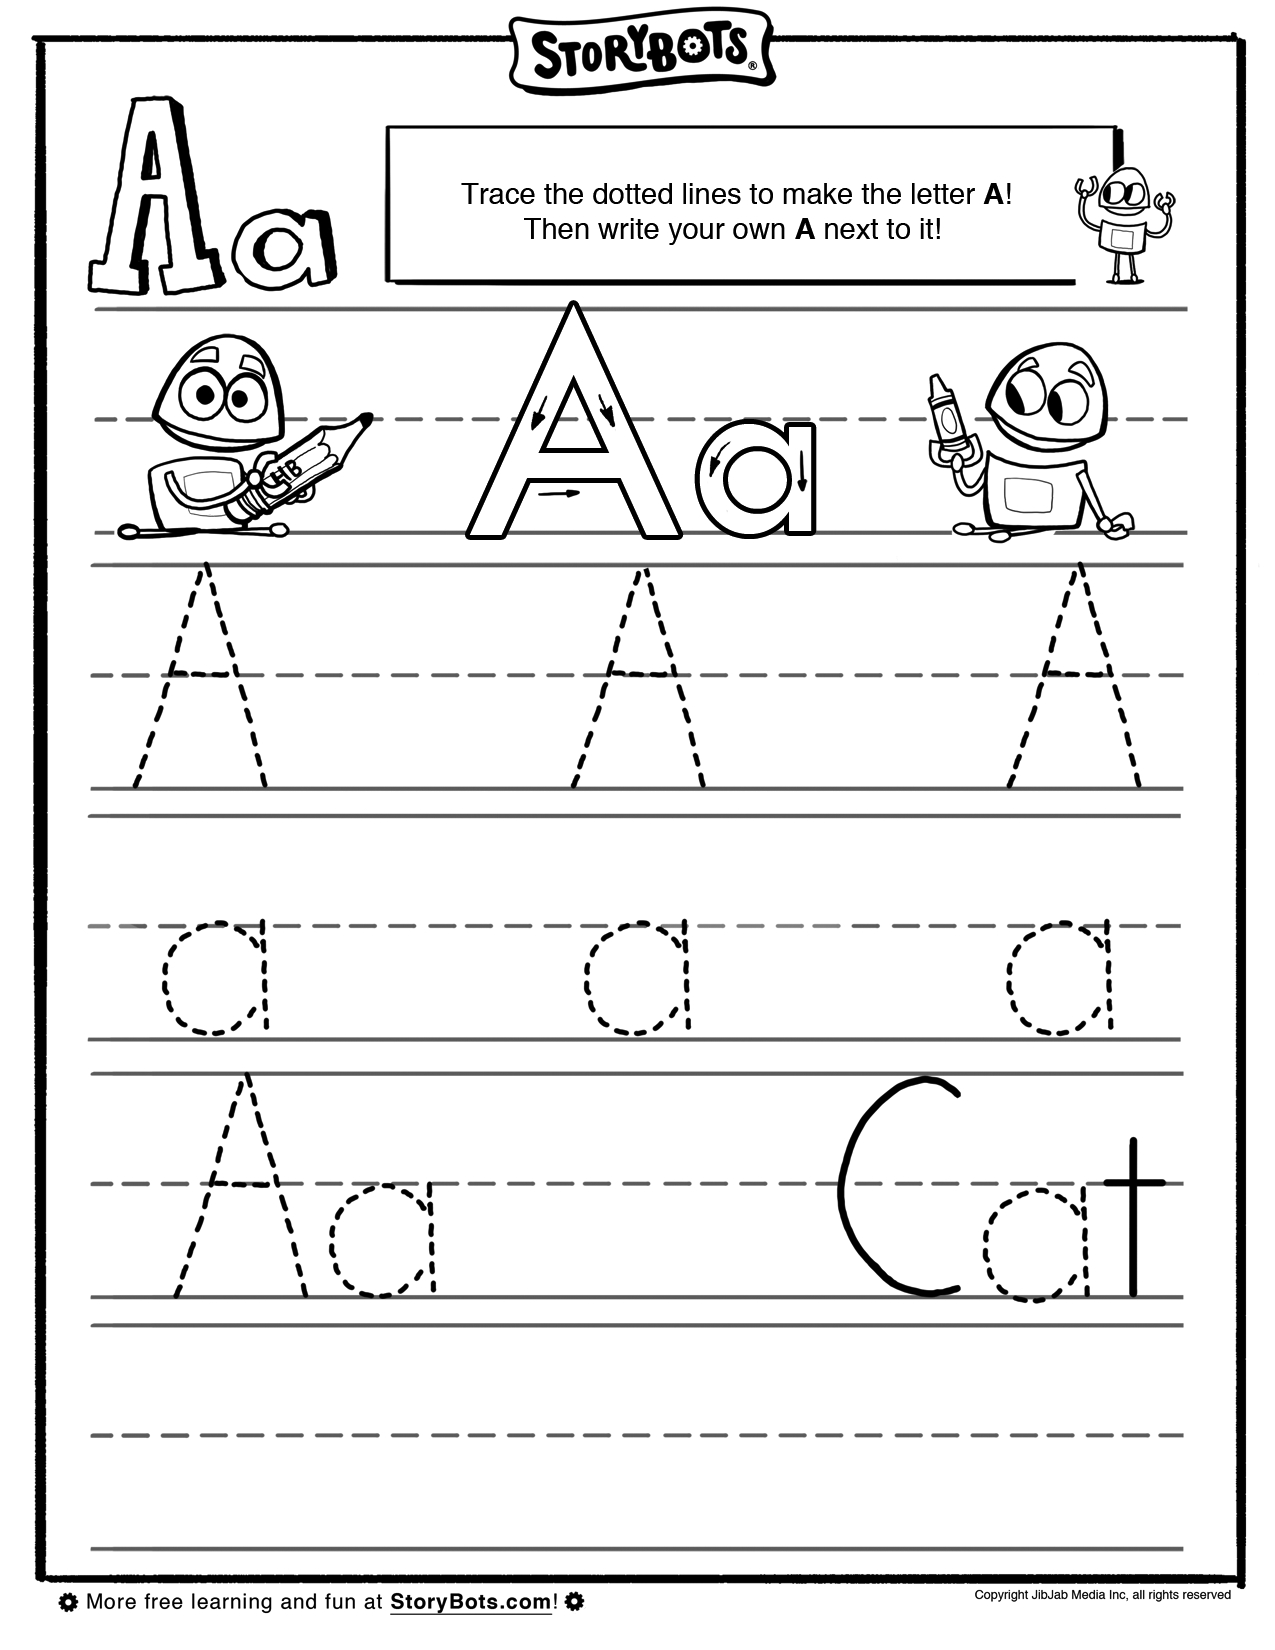 Letter A Tracing Sheet - Abc Activity Sheets - Storybots with Tracing Letters Activity Sheets